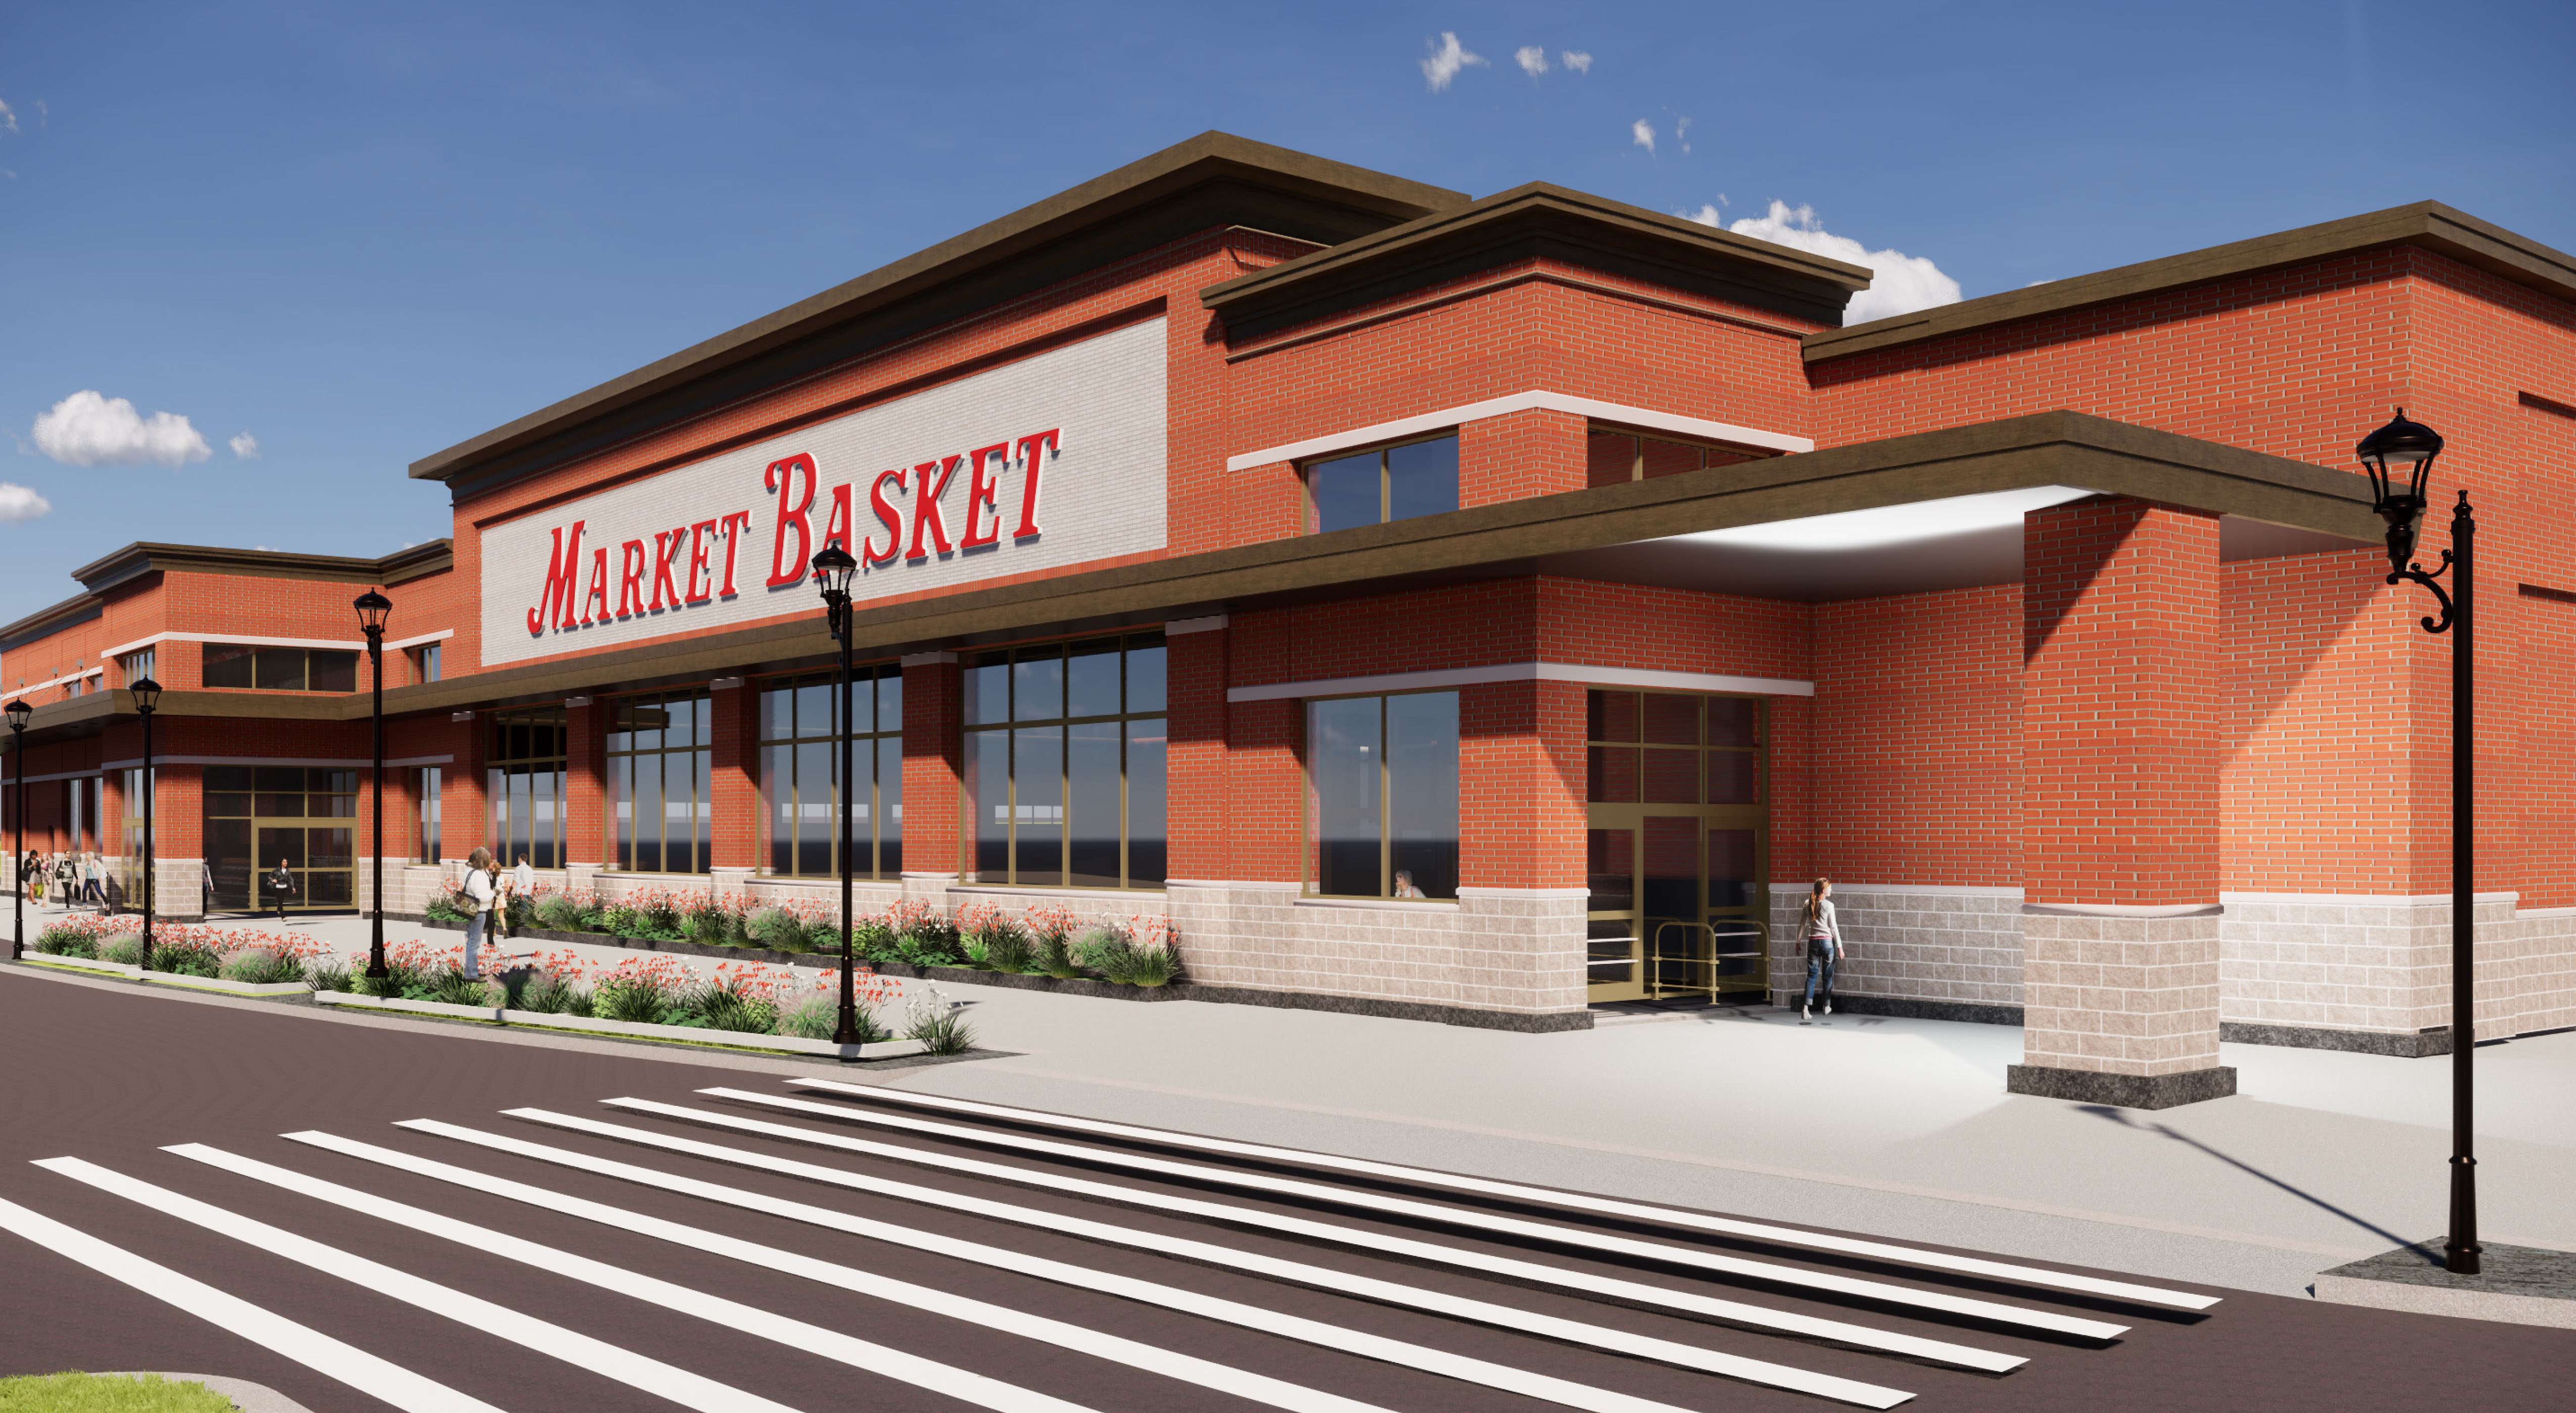 Market Basket Says an Imposter Facebook Account is Sending Friend